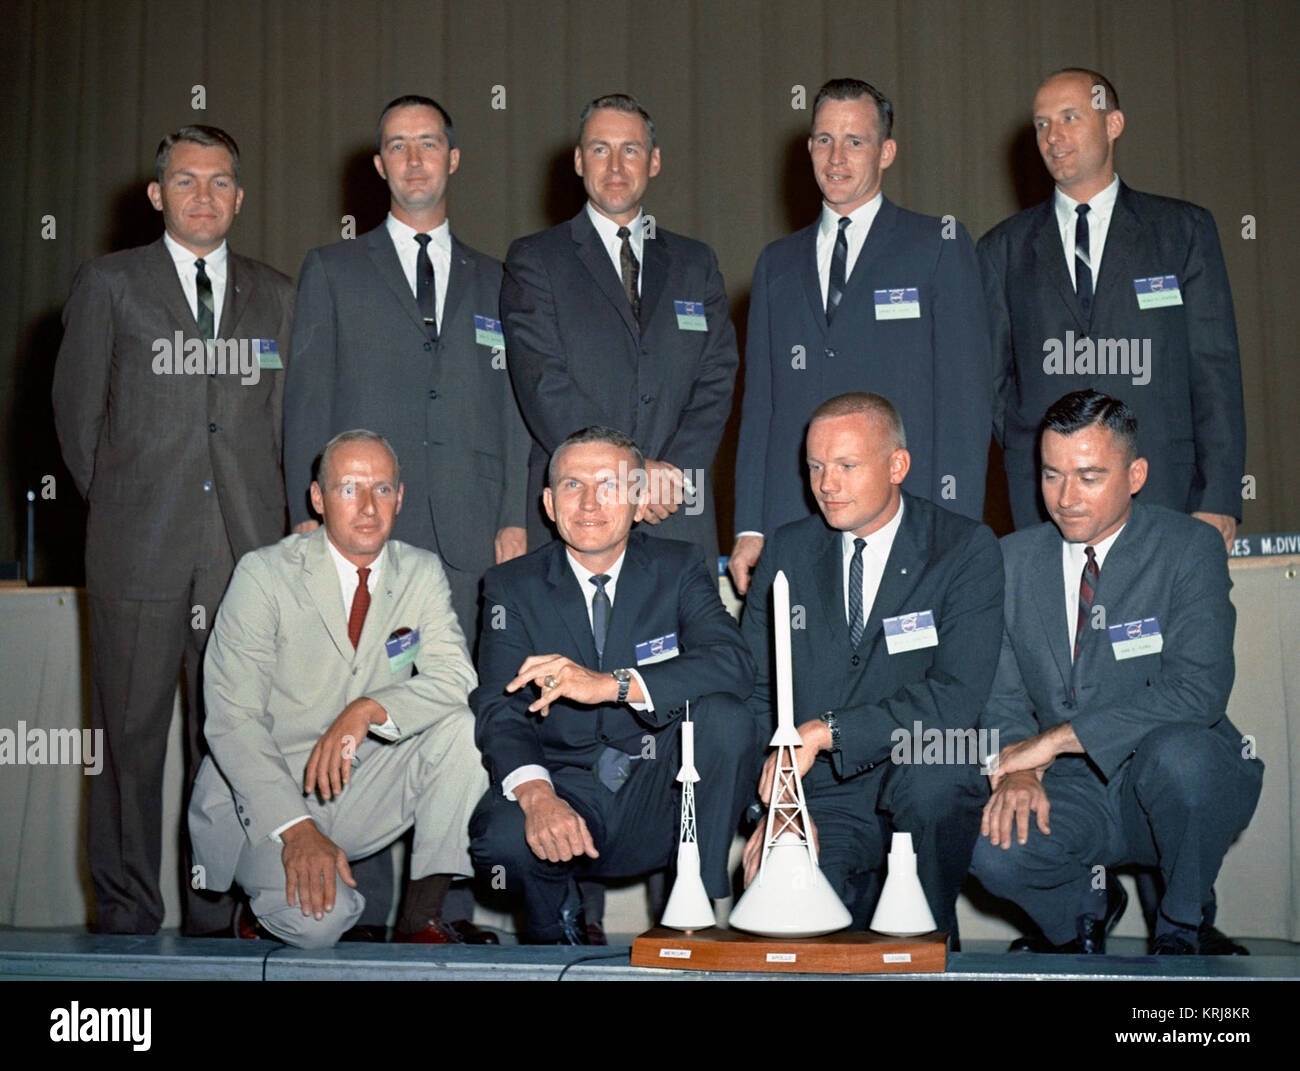 S62-06759 (1962) --- This is the second group of pilot astronauts chosen by the National Aeronautics and Space Administration (NASA).  These astronaut pilots are (kneeling left to right) Charles Conrad, Jr., Frank Borman, Neil A. Armstrong, and John W. Young; (standing in the back row - left to right) Elliot M. See, Jr., James A. McDivitt, James A. Lovell, Jr., Edward H. White II, and Thomas P. Stafford. Astronaut Group 2 - S62-6759 Stock Photo